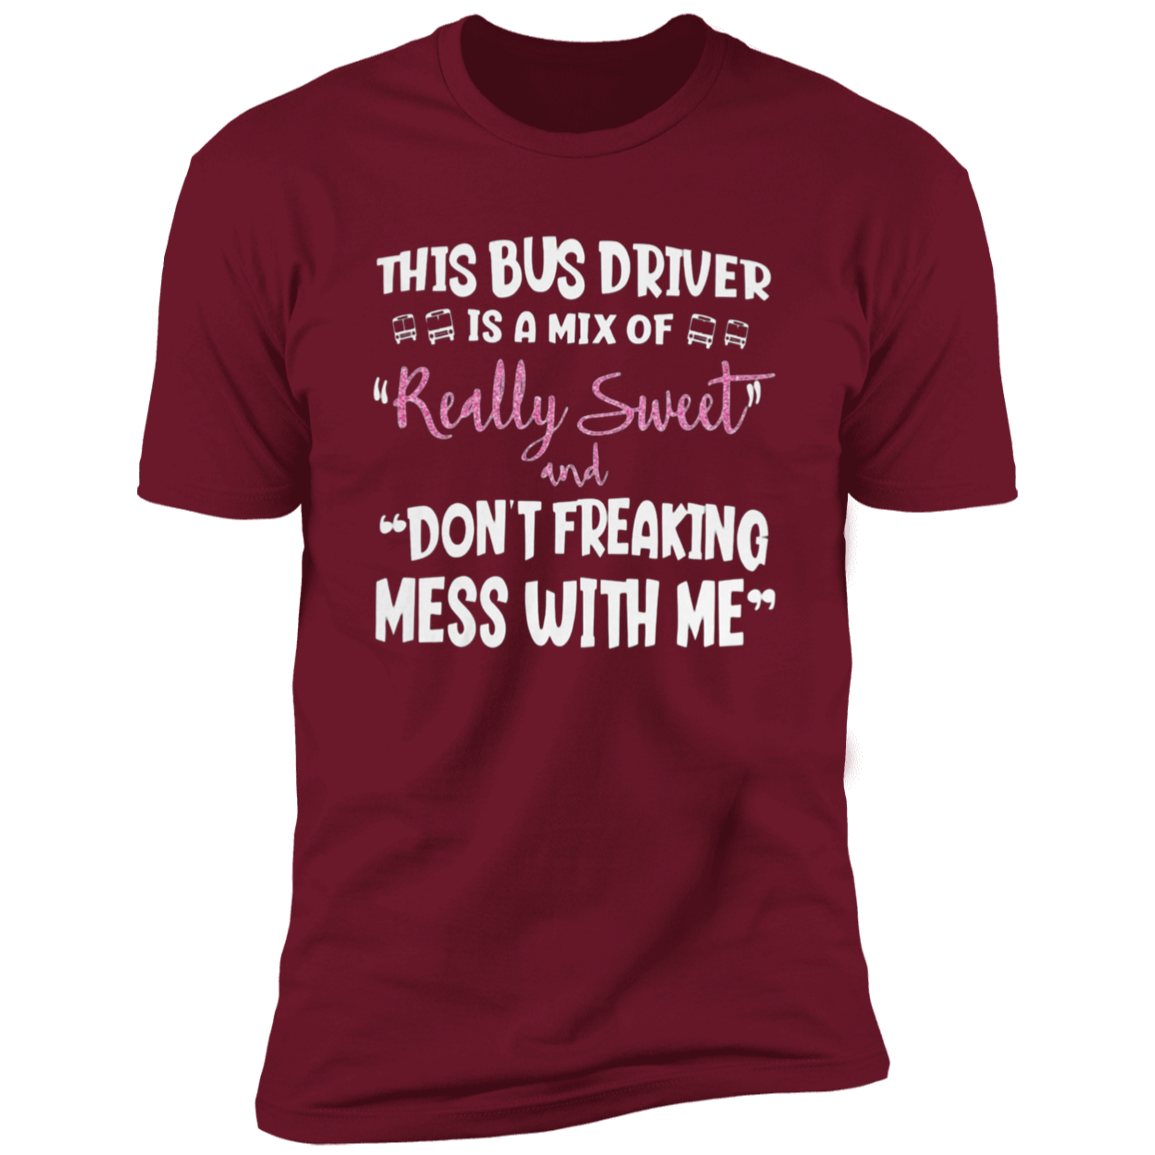 This Bus Driver is a mix of Really Sweet Tee